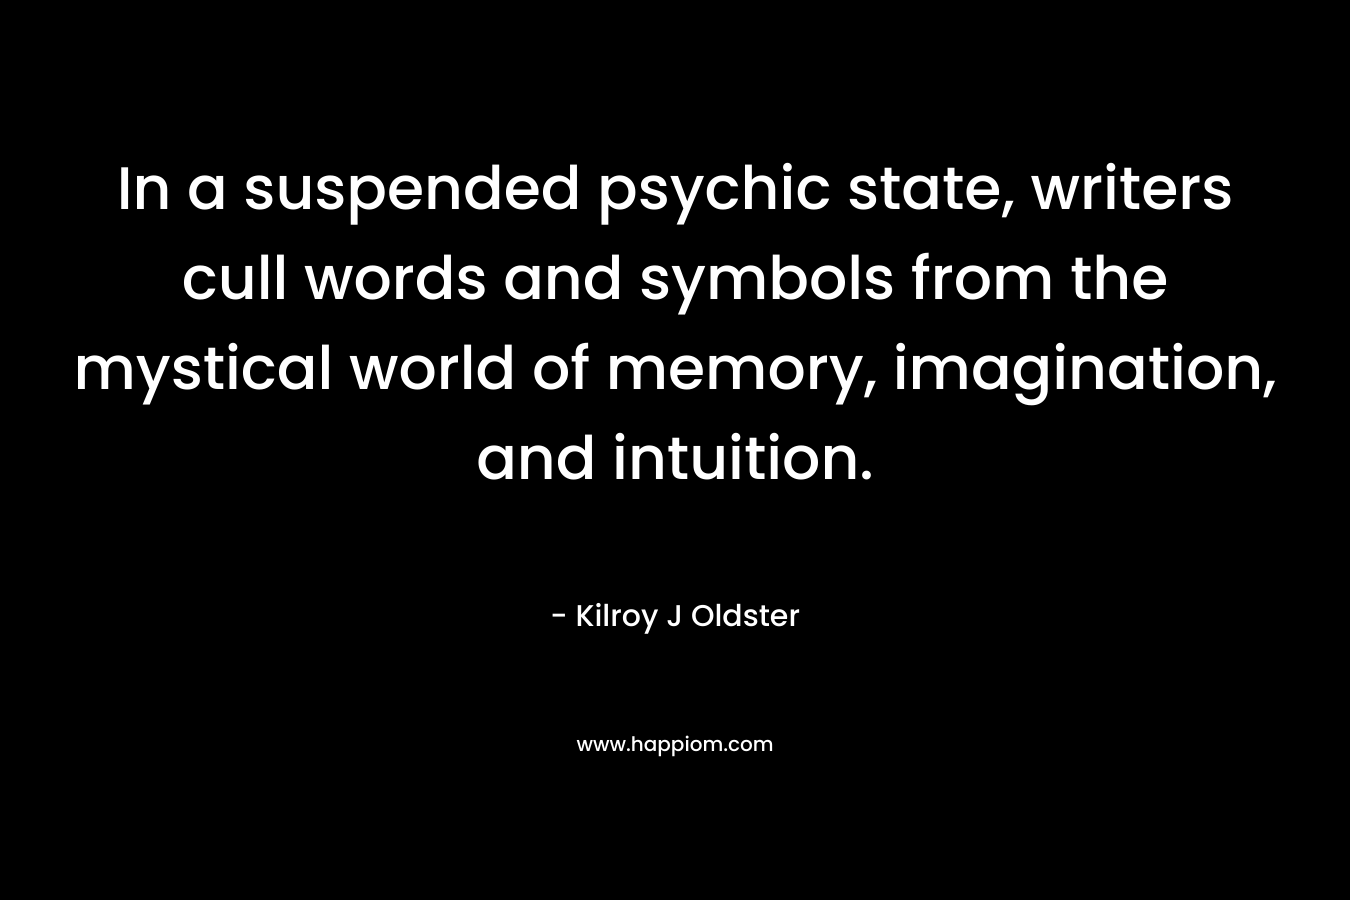 In a suspended psychic state, writers cull words and symbols from the mystical world of memory, imagination, and intuition. – Kilroy J Oldster